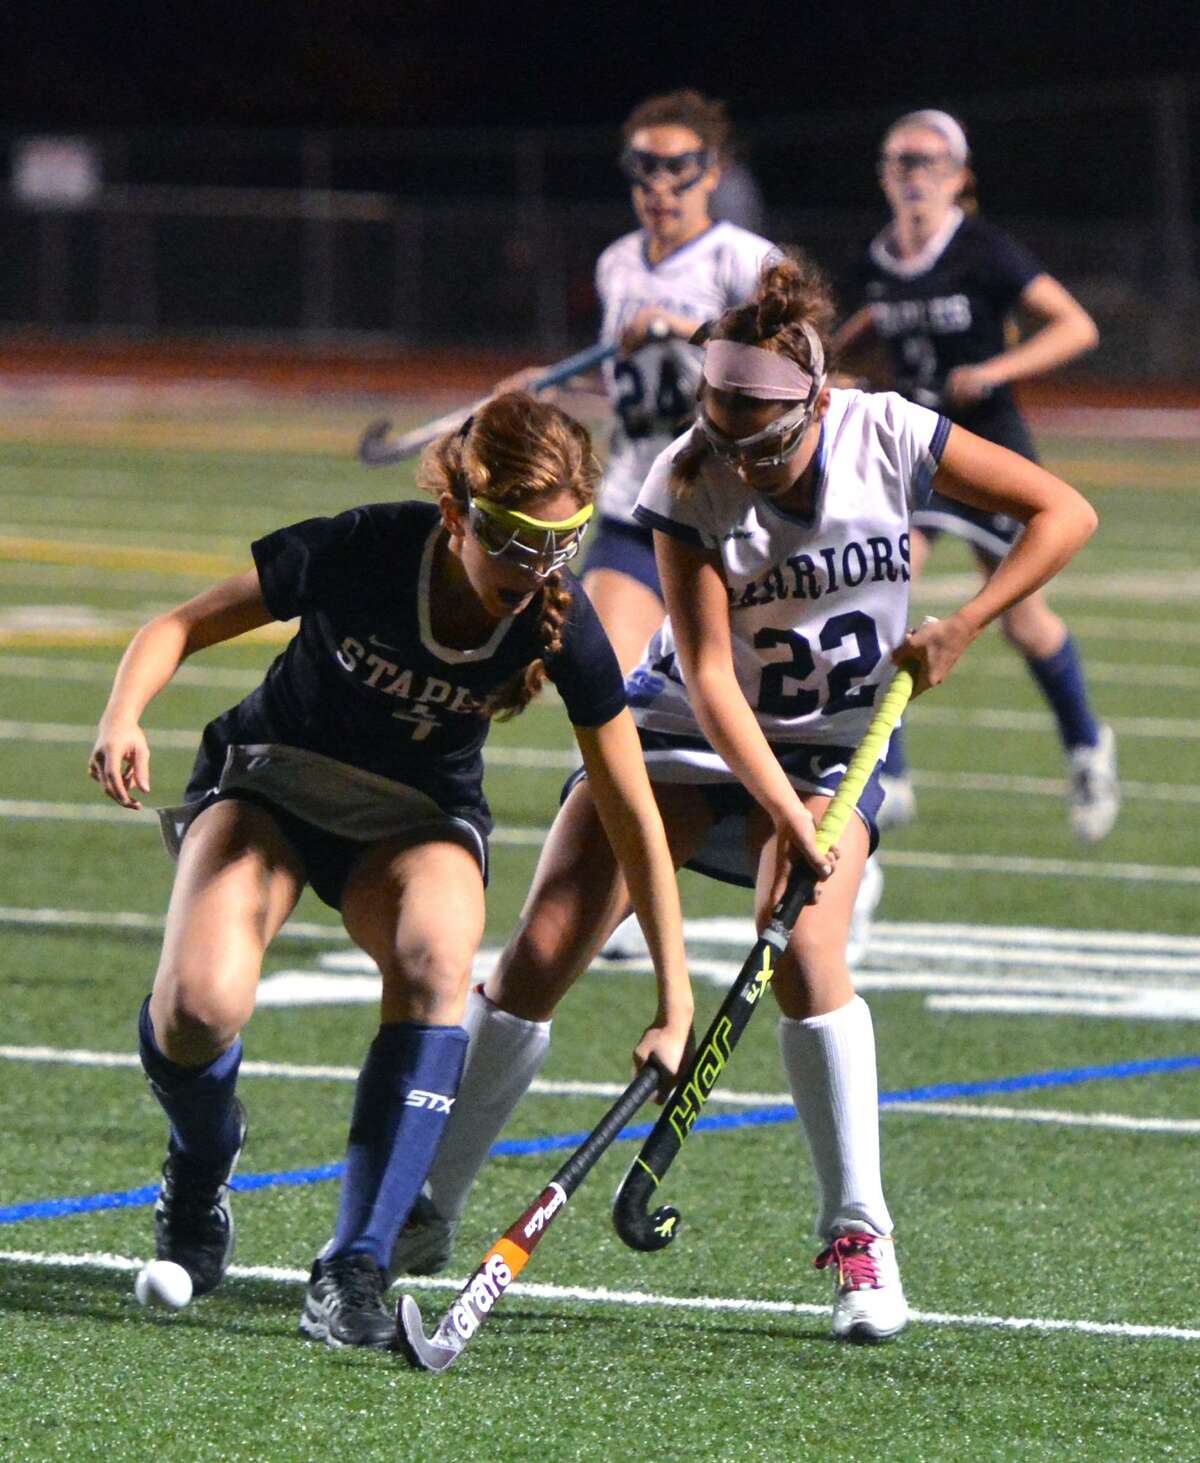 Staples’ Grace Cooper (4) keeps the ball away from Wilton's Olivia Hahn (22) in the FCIAC championship girls field hockey game Thursday at Brien McMahon High School in Norwalk.